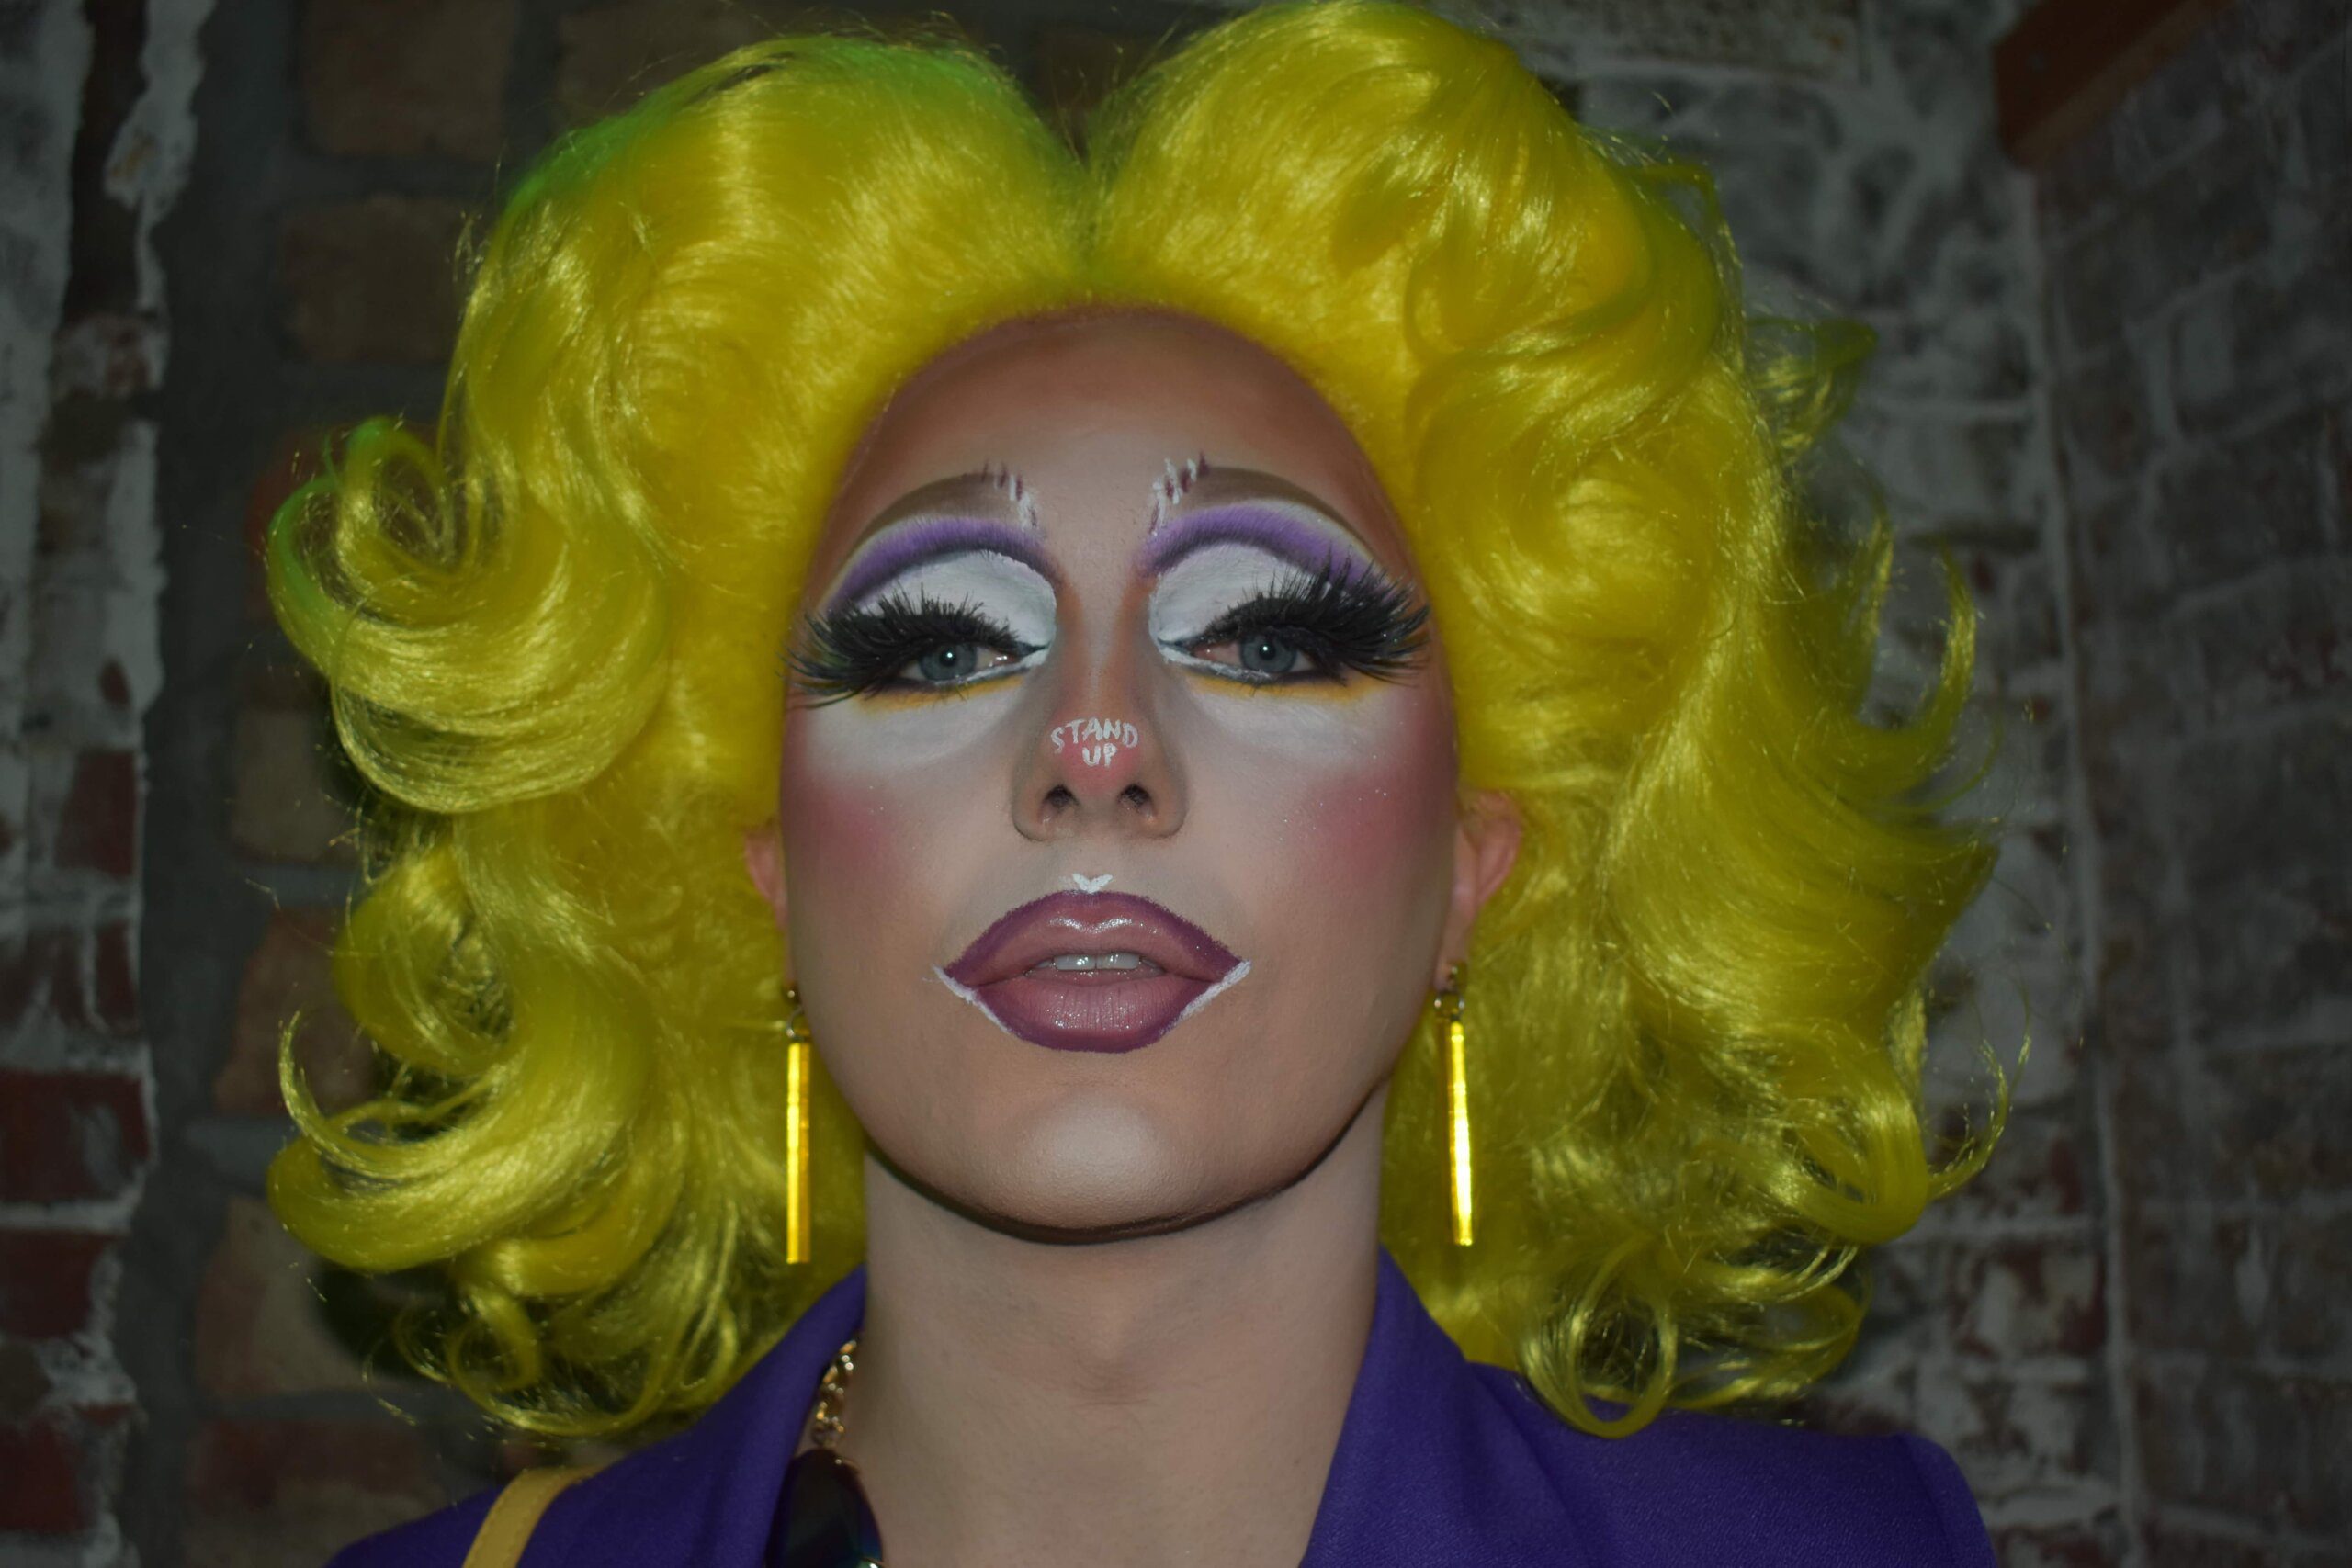 Drag queen Robin Rose Quartz wears a yellow wig and dramatic makeup; she looks directly at the camera.